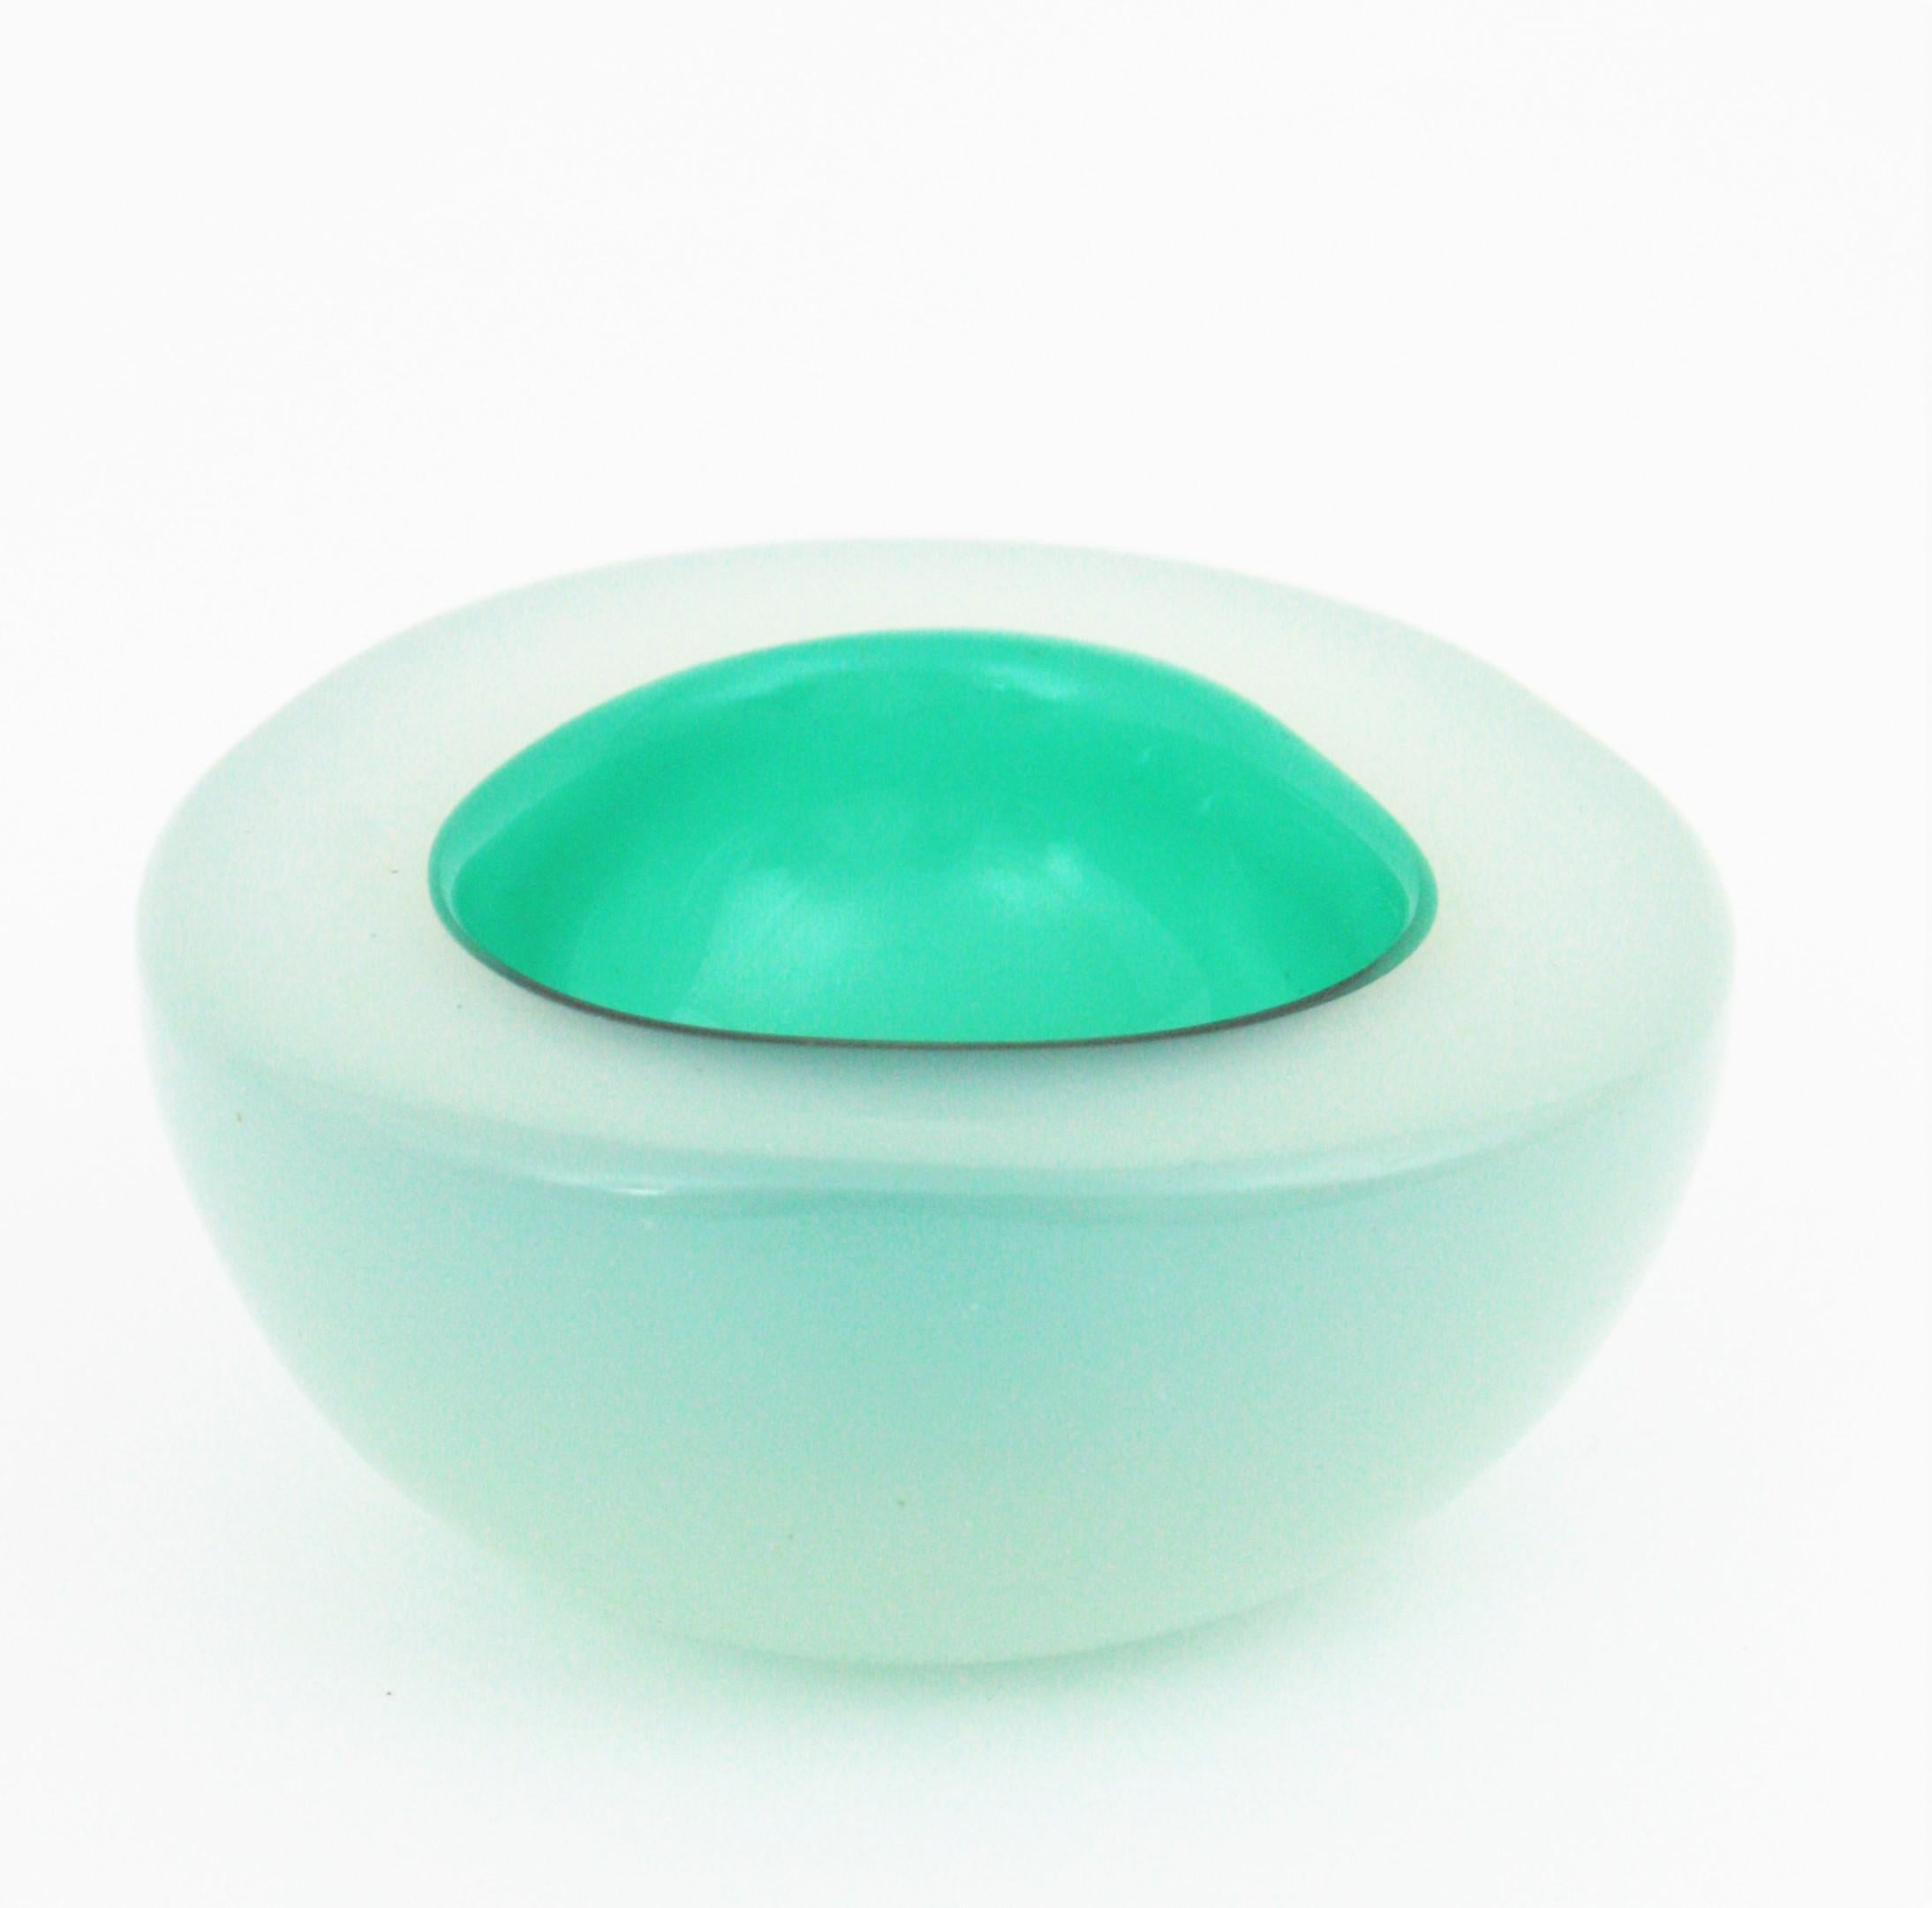 Green white geode triangular bowl, Murano glass. Italy, 1950s.
Hand blown Murano glass Sommerso geode bowl in aqua green and opalescent white color attributed to Archimede Seguso. 
Aqua Green and opal white glass cased into clear glass.
Lovely to be